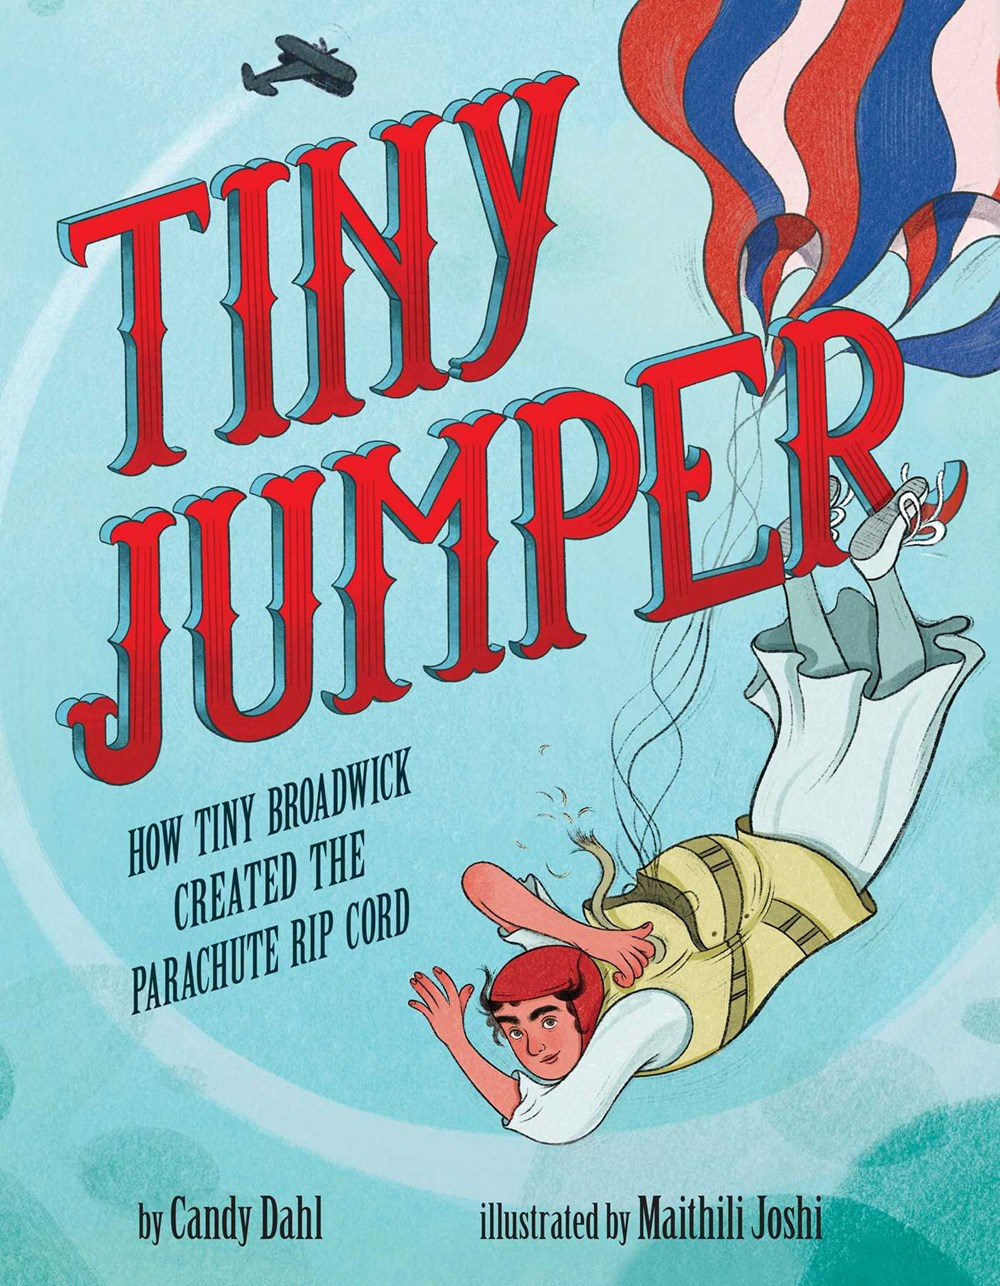 Read Tiny Jumper about Tiny Broadwick, a mill girl with big dreams, who soared to new heights as a parachute pioneer and inventor of the rip cord.